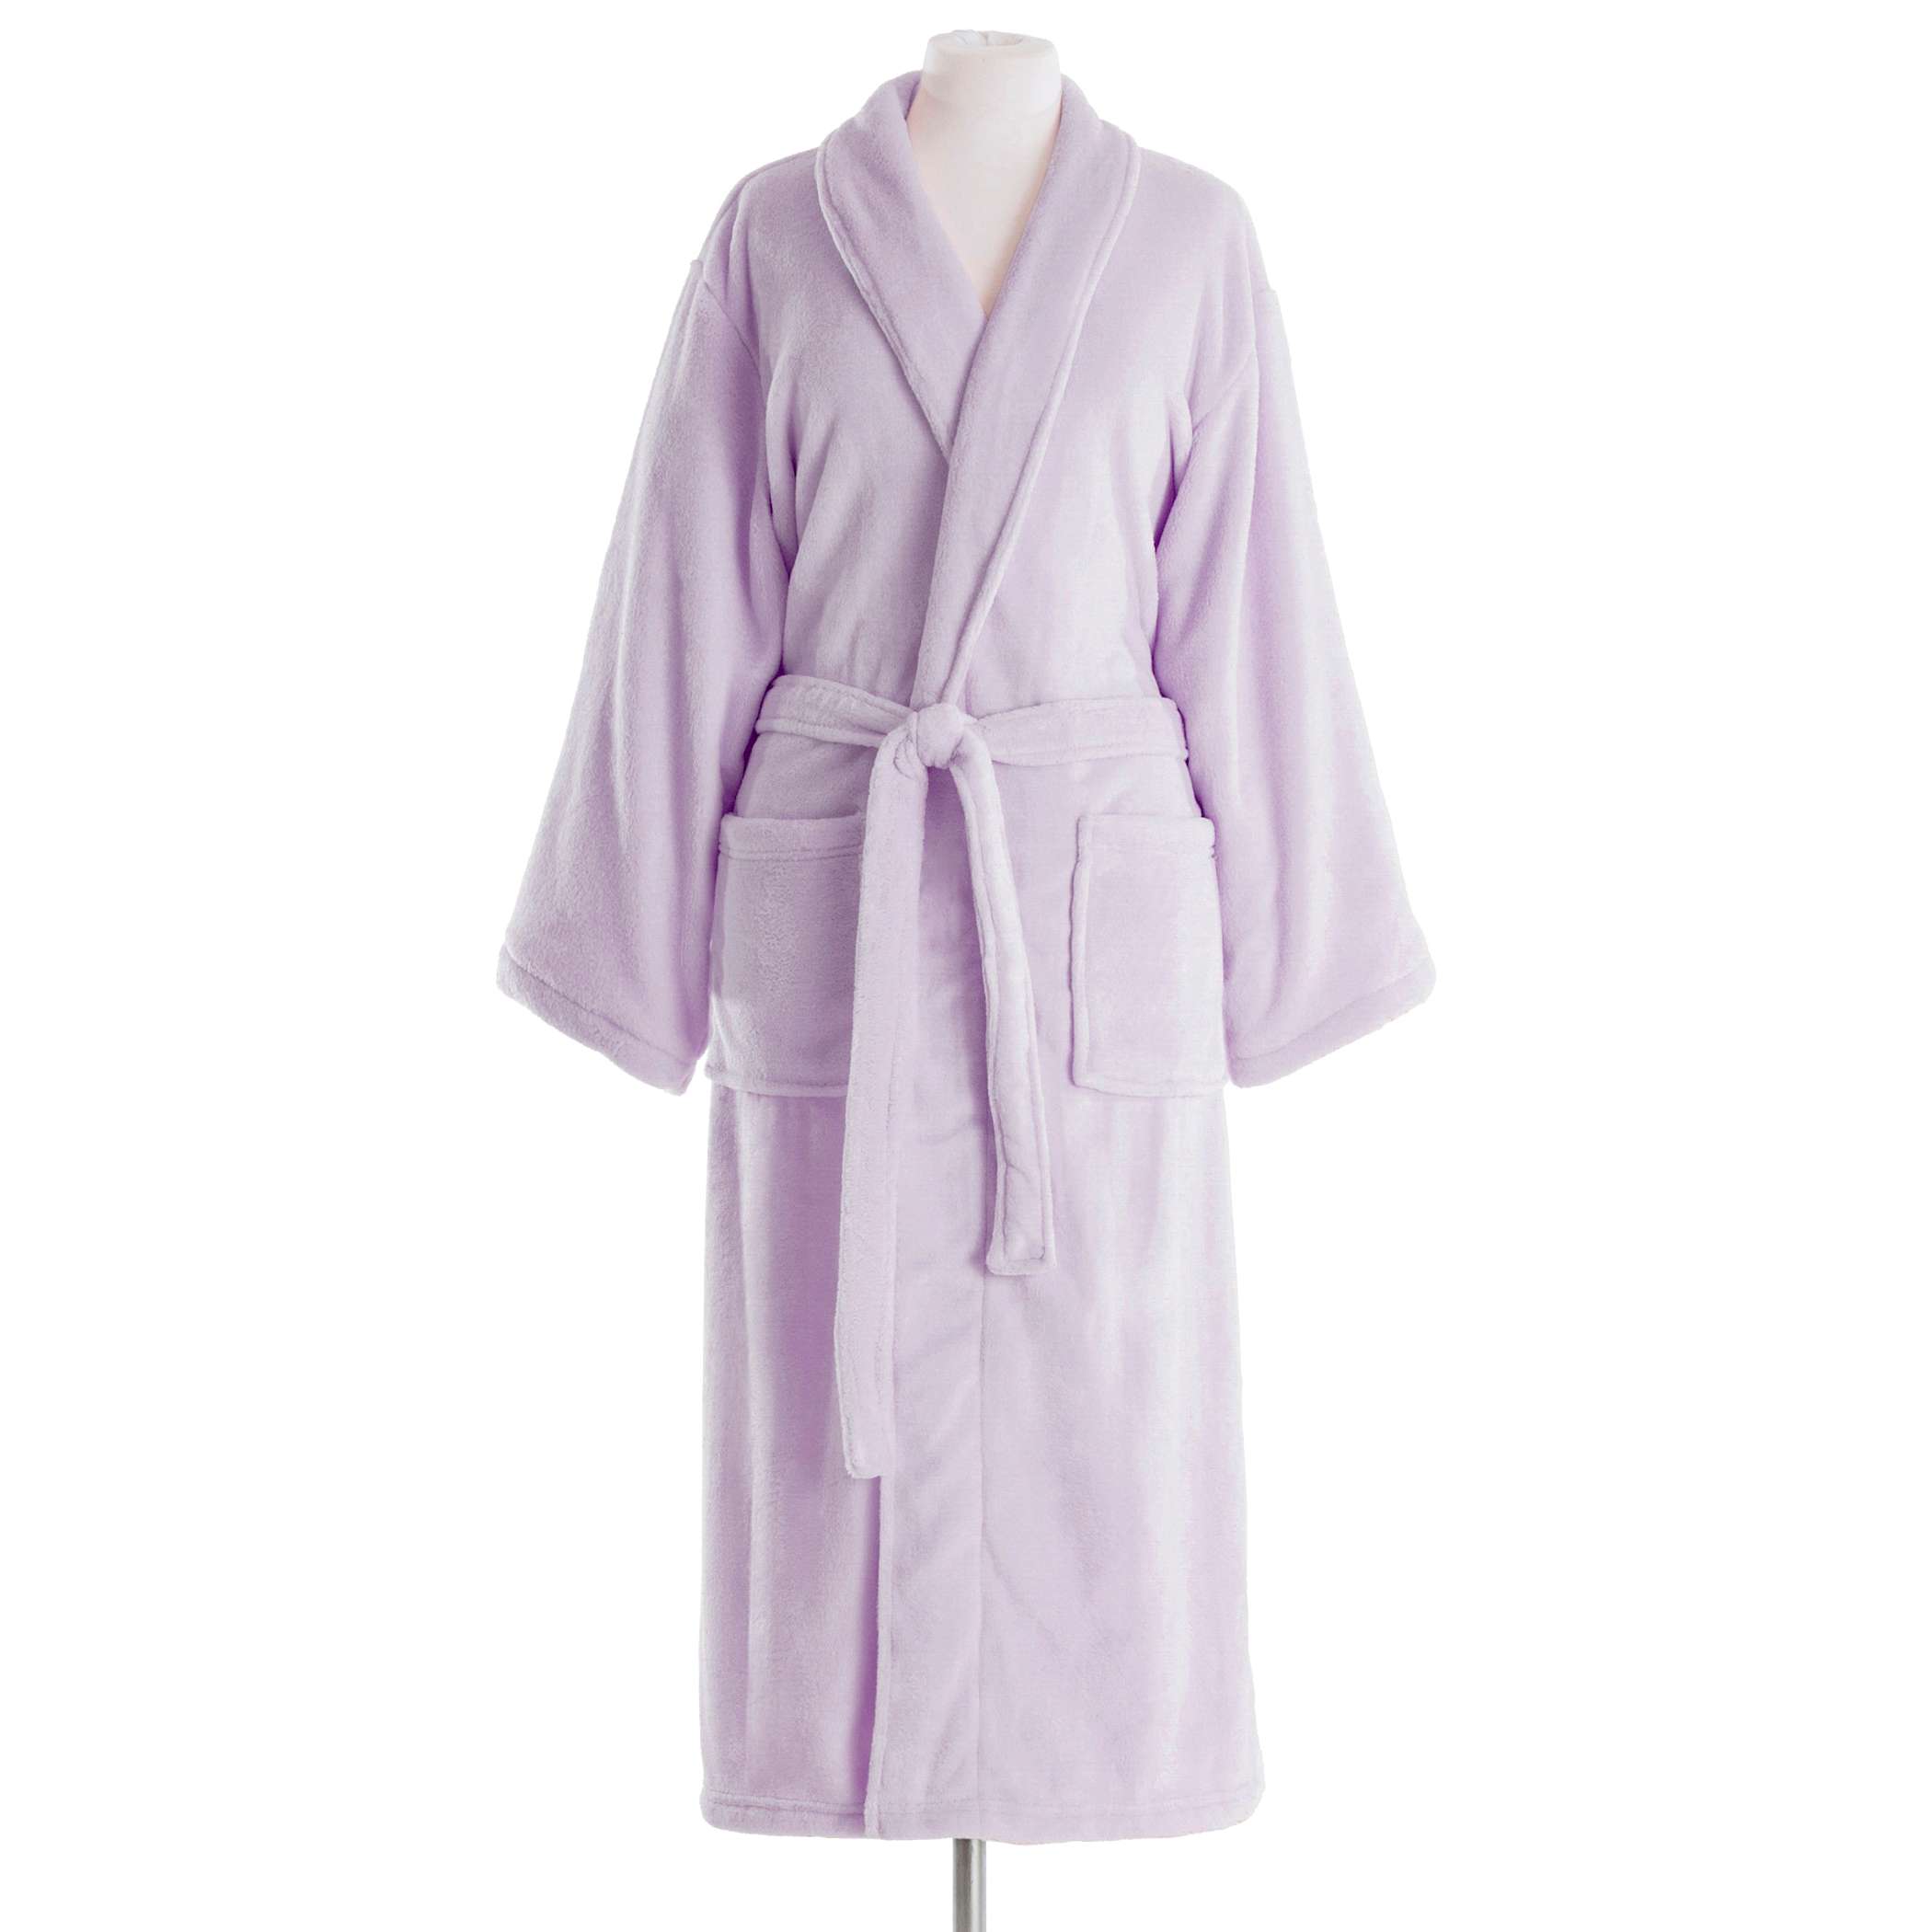 Sheepy Fleece Pale Lilac Robe | The Outlet